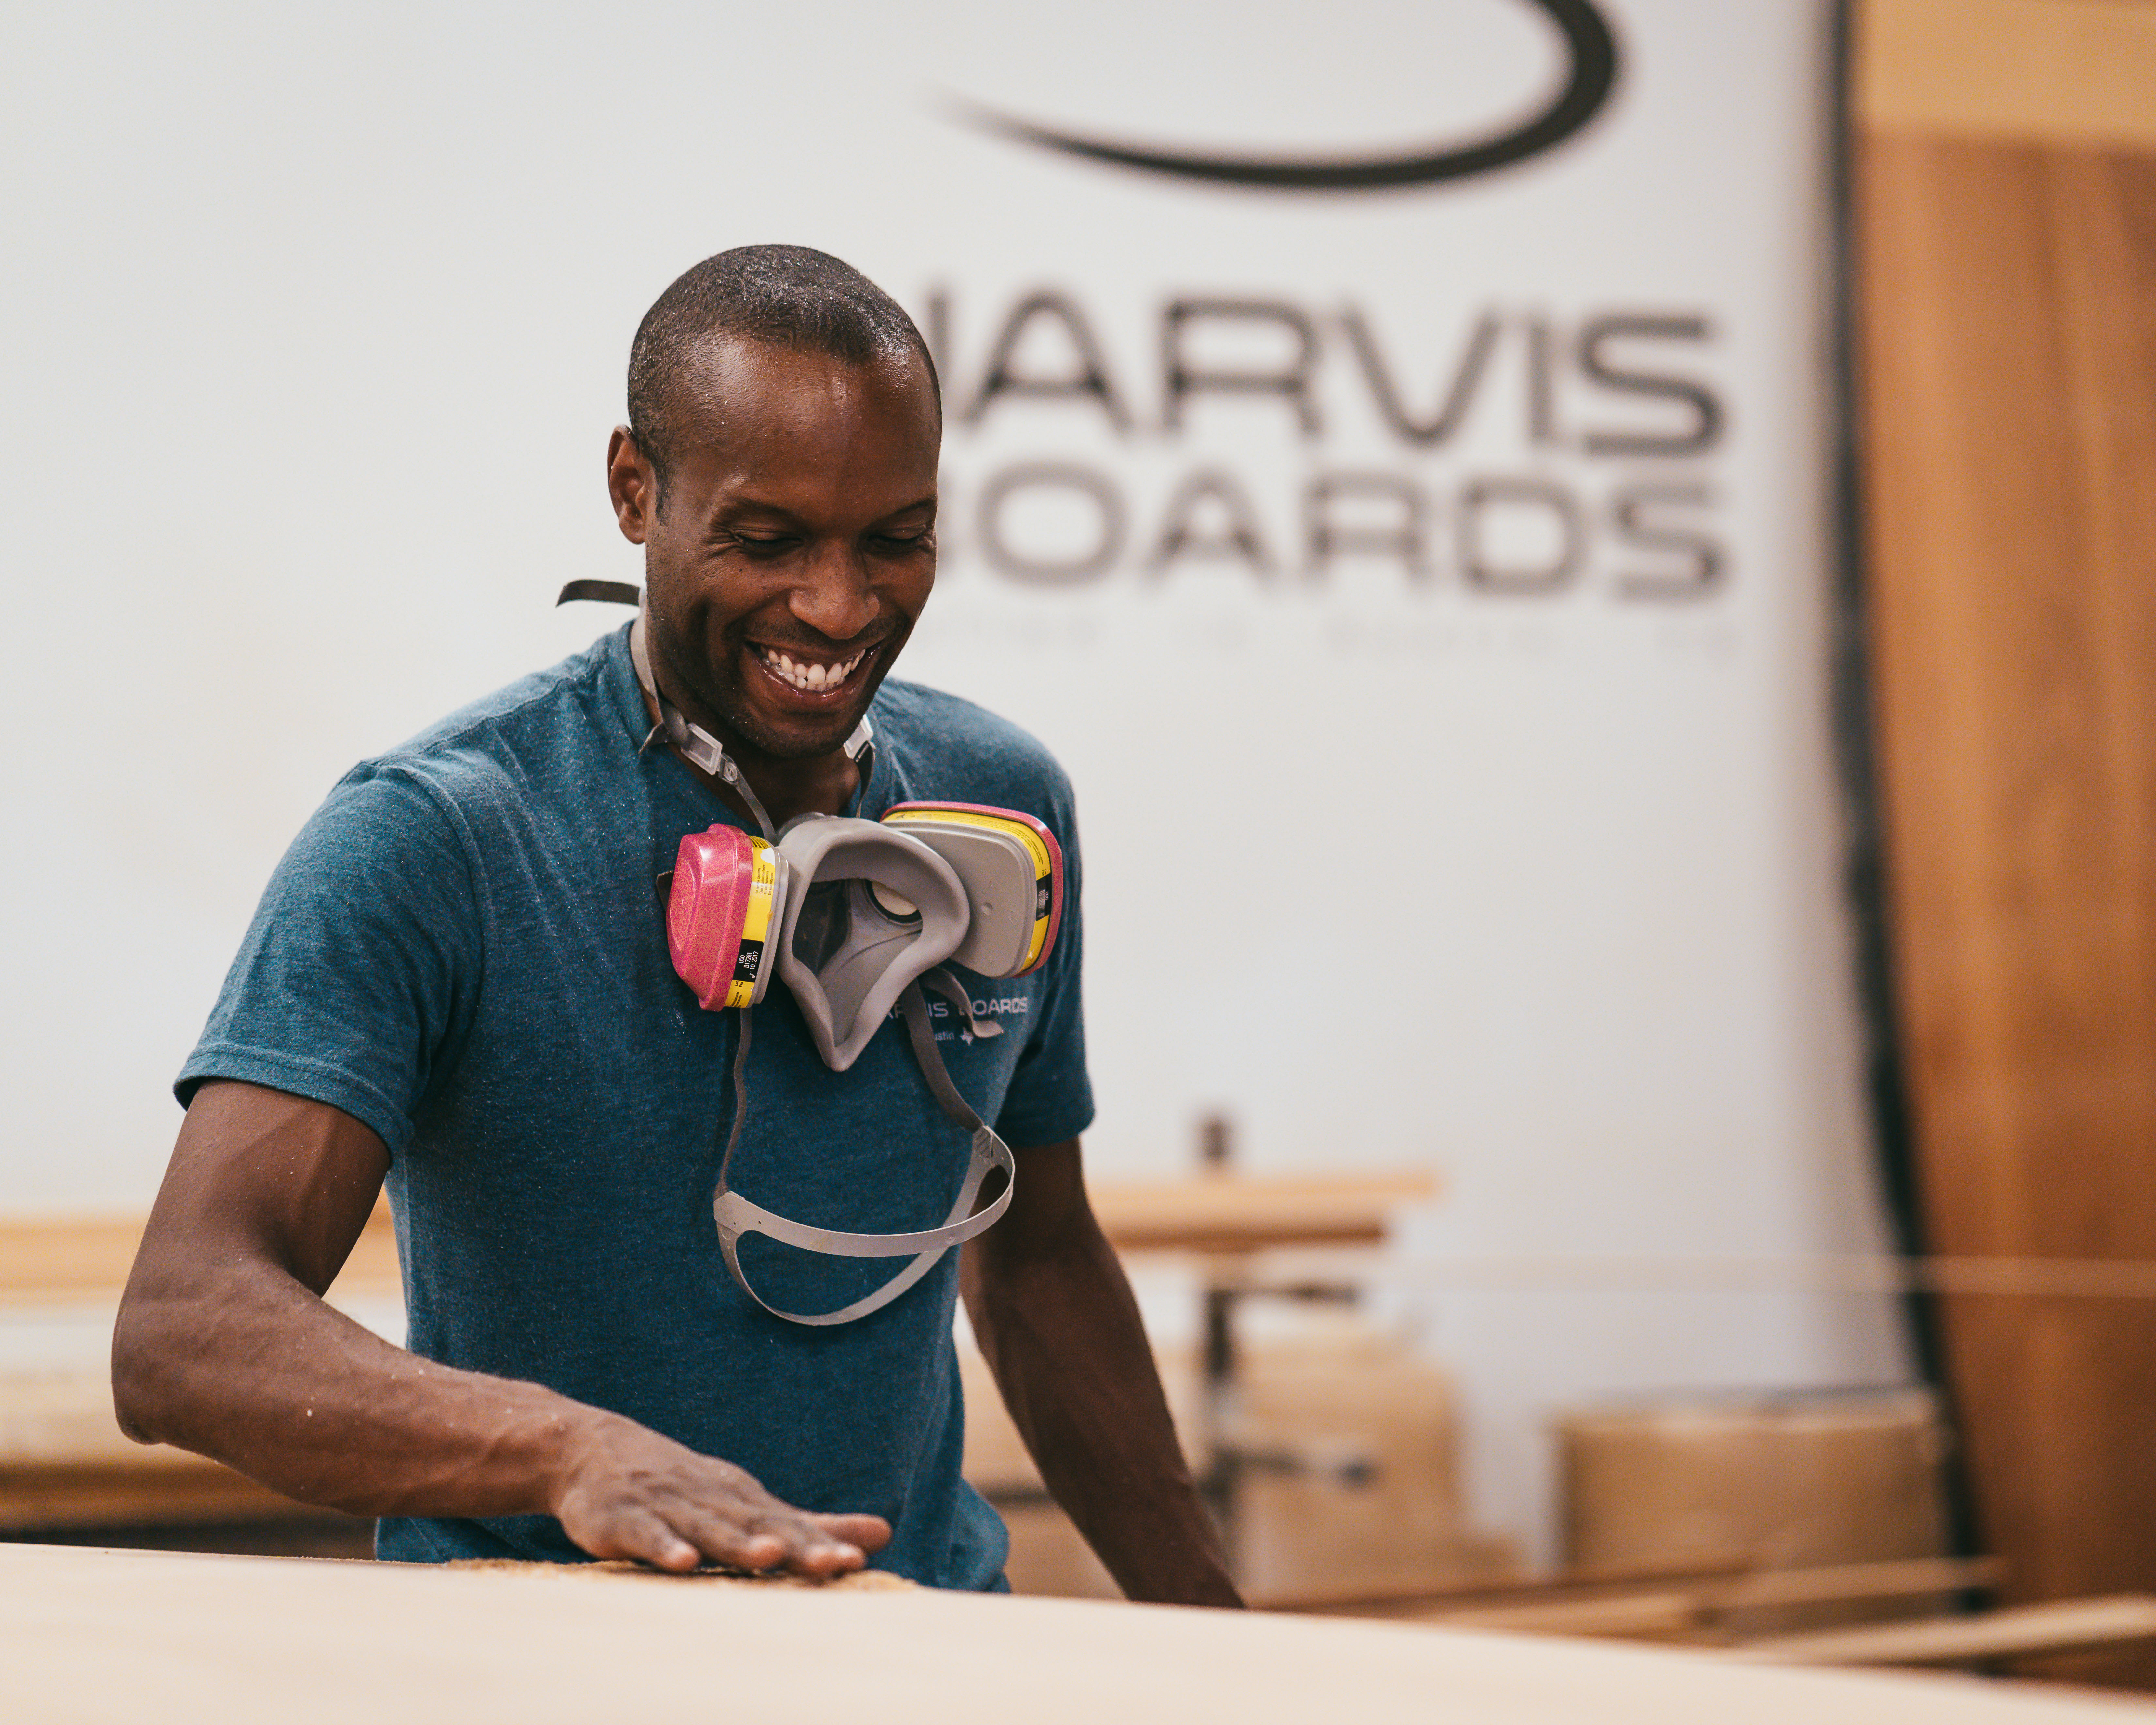 Jarvis Boards